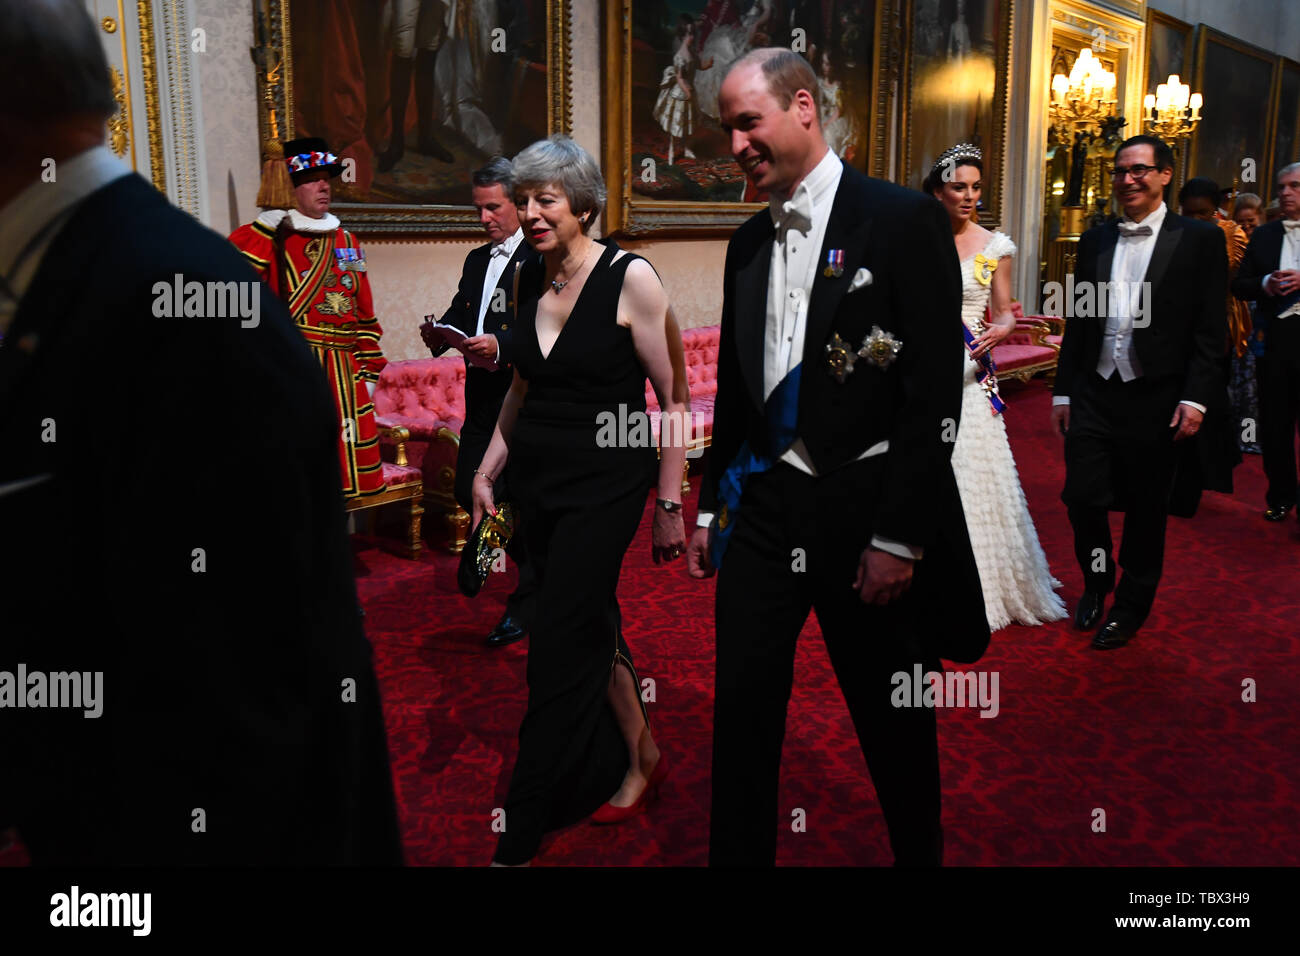 Prime Minister Theresa May and the Duke of Cambridge, followed by the Duchess of Cambridge and United States Secretary of the Treasury, Steven Mnuchin, as they arrive through the East Gallery during the State Banquet at Buckingham Palace, London, on day one of the US President's three day state visit to the UK. Stock Photo